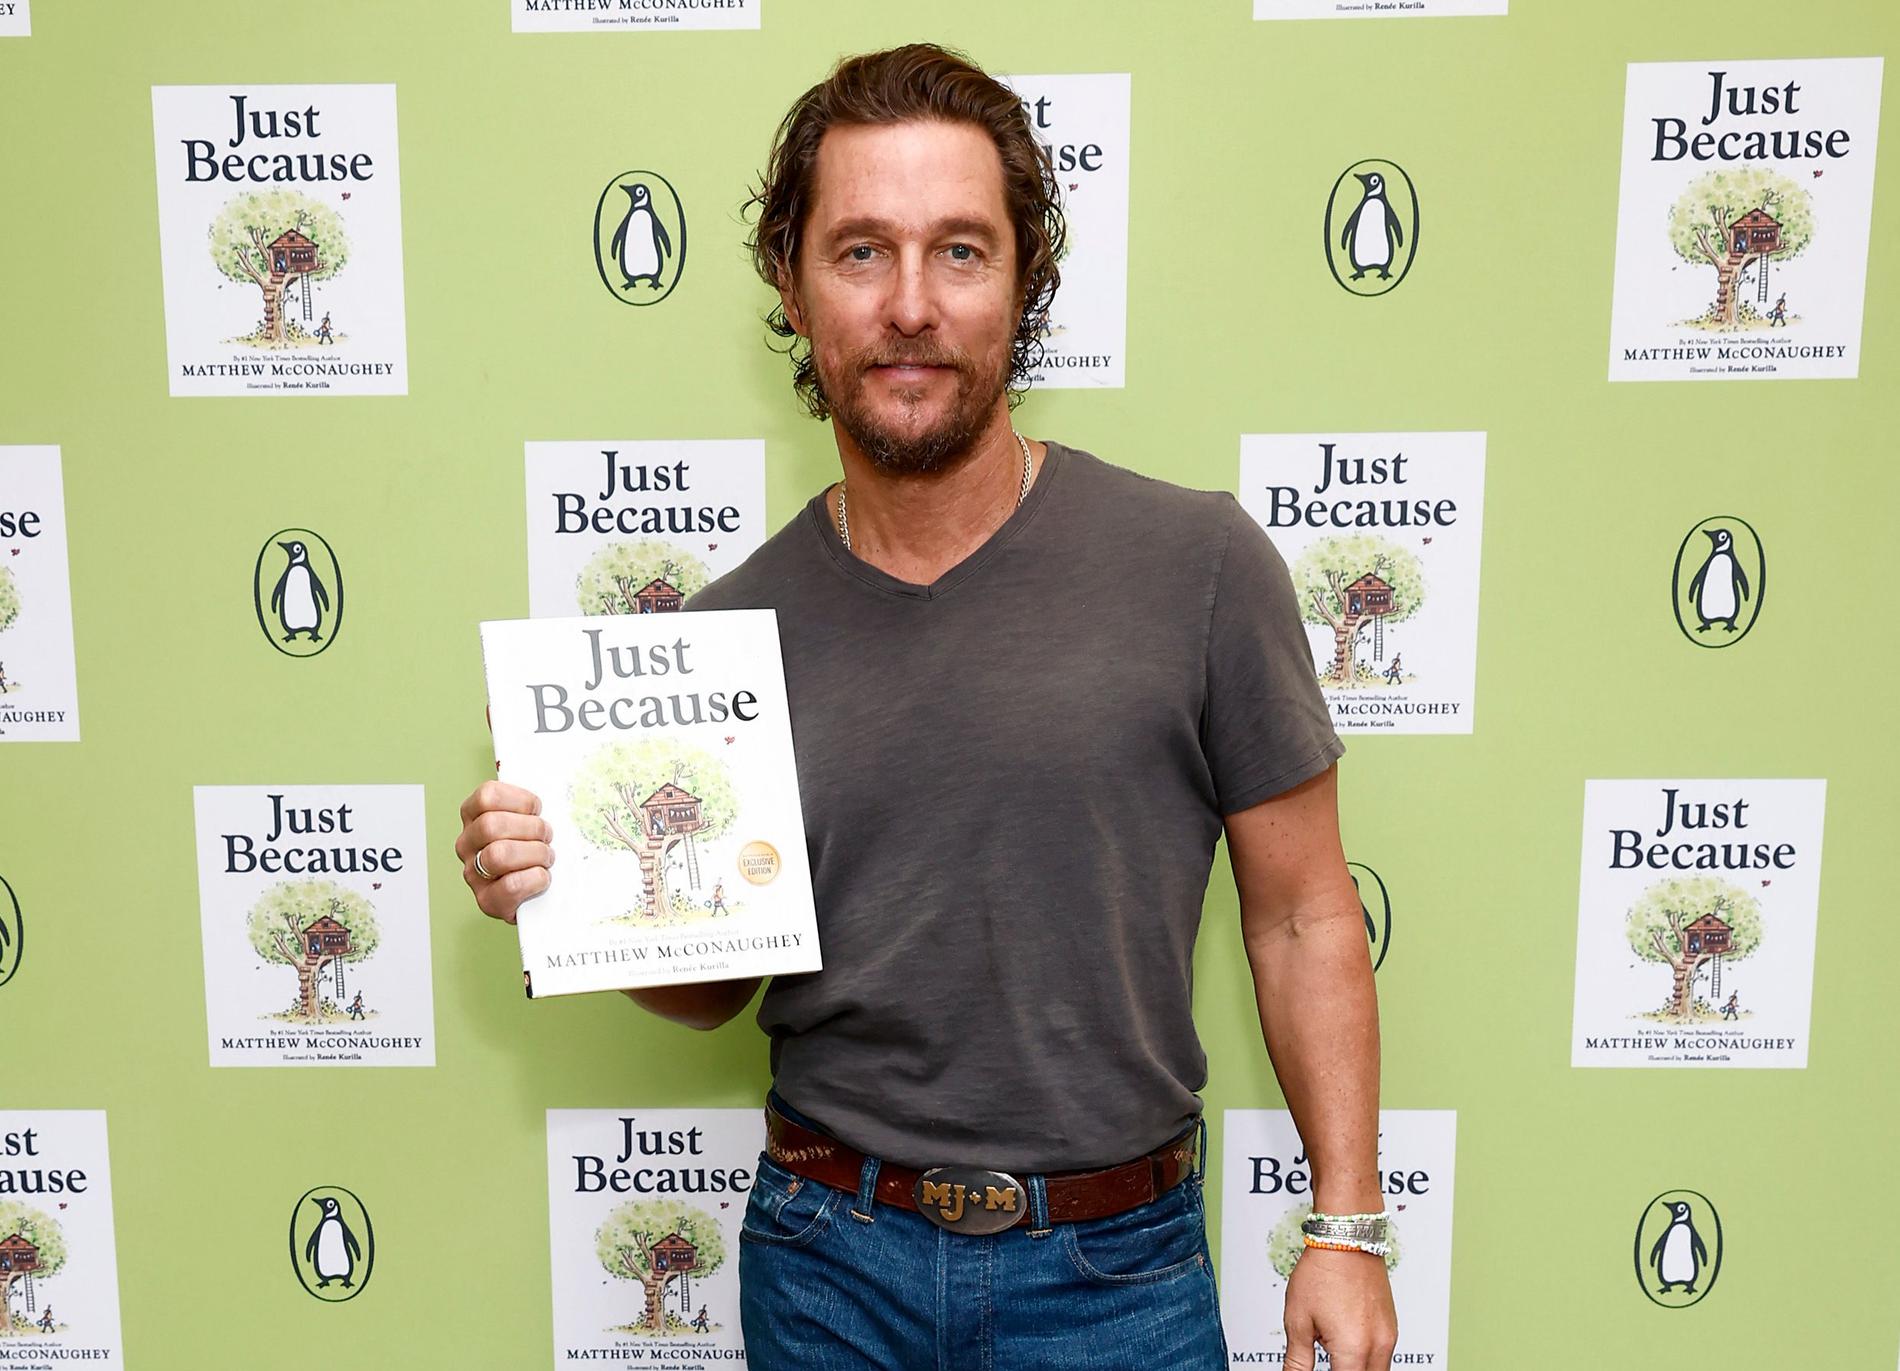 Current book: Matthew McConaughey at the launch party in Los Angeles on September 16.